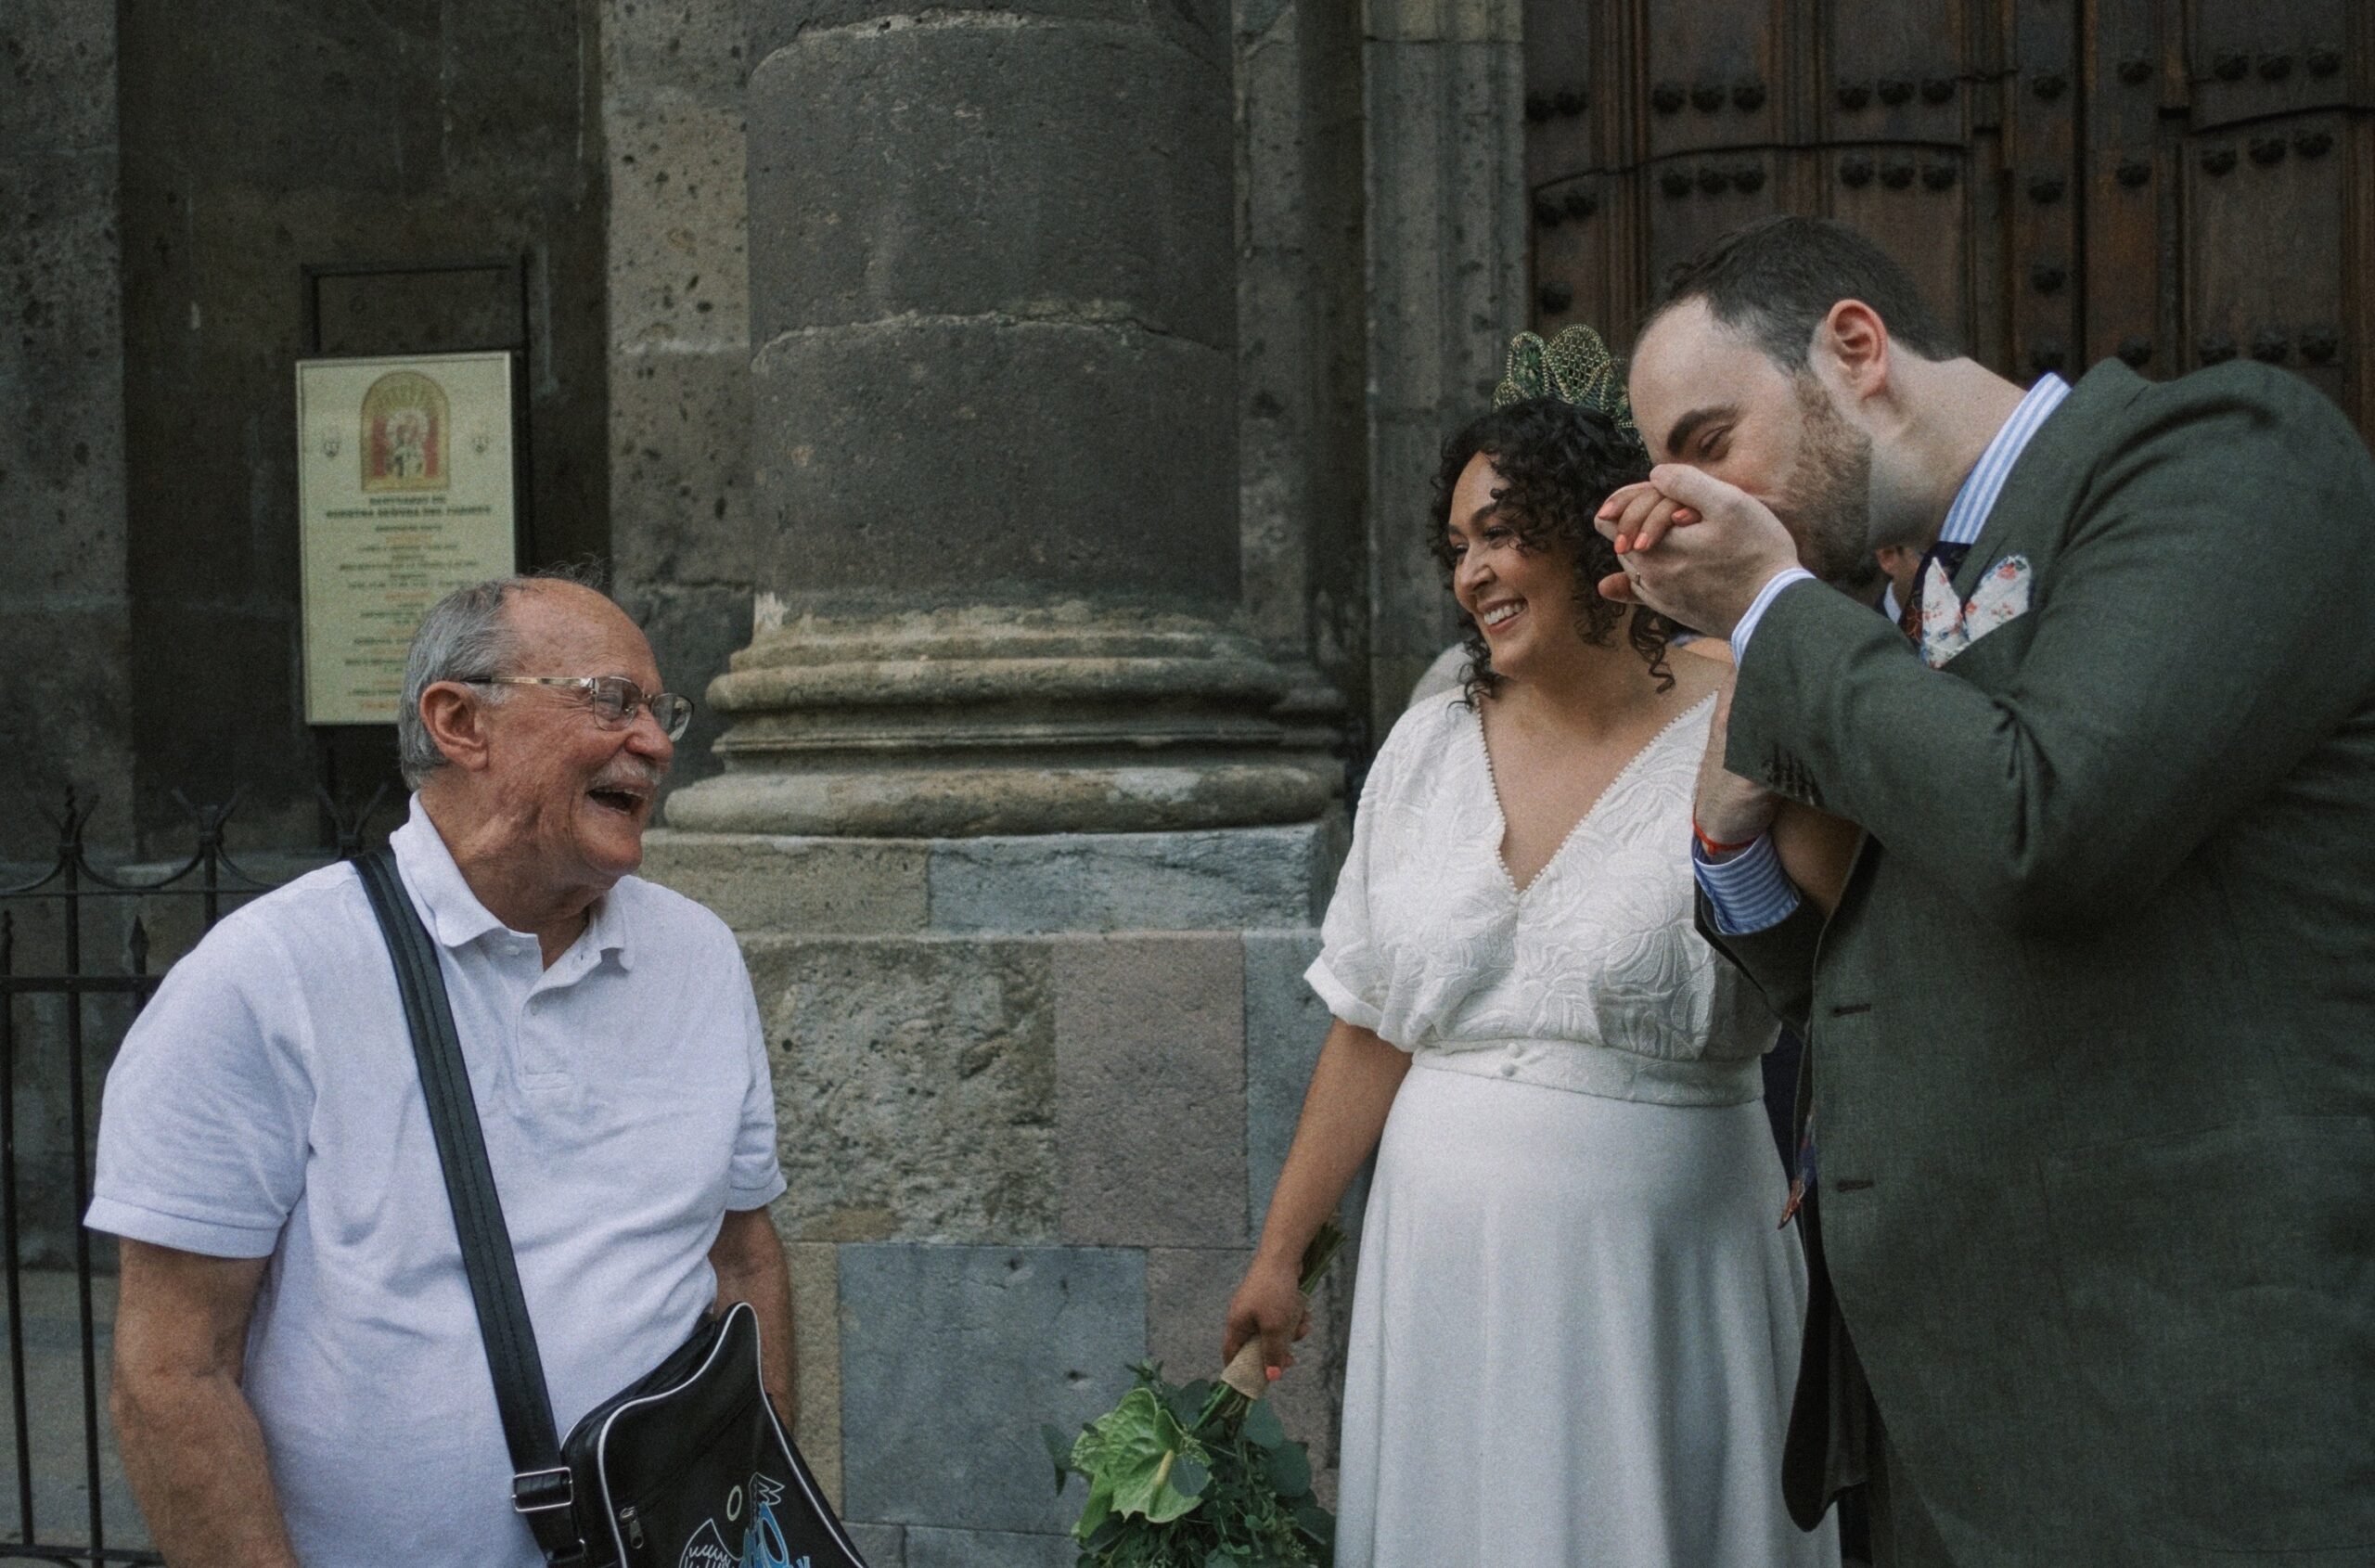 priest congratulates bride and groom after getting married in Guadalajara Mexico - captured by documentary wedding photographer - fujifilm classic wedding photo